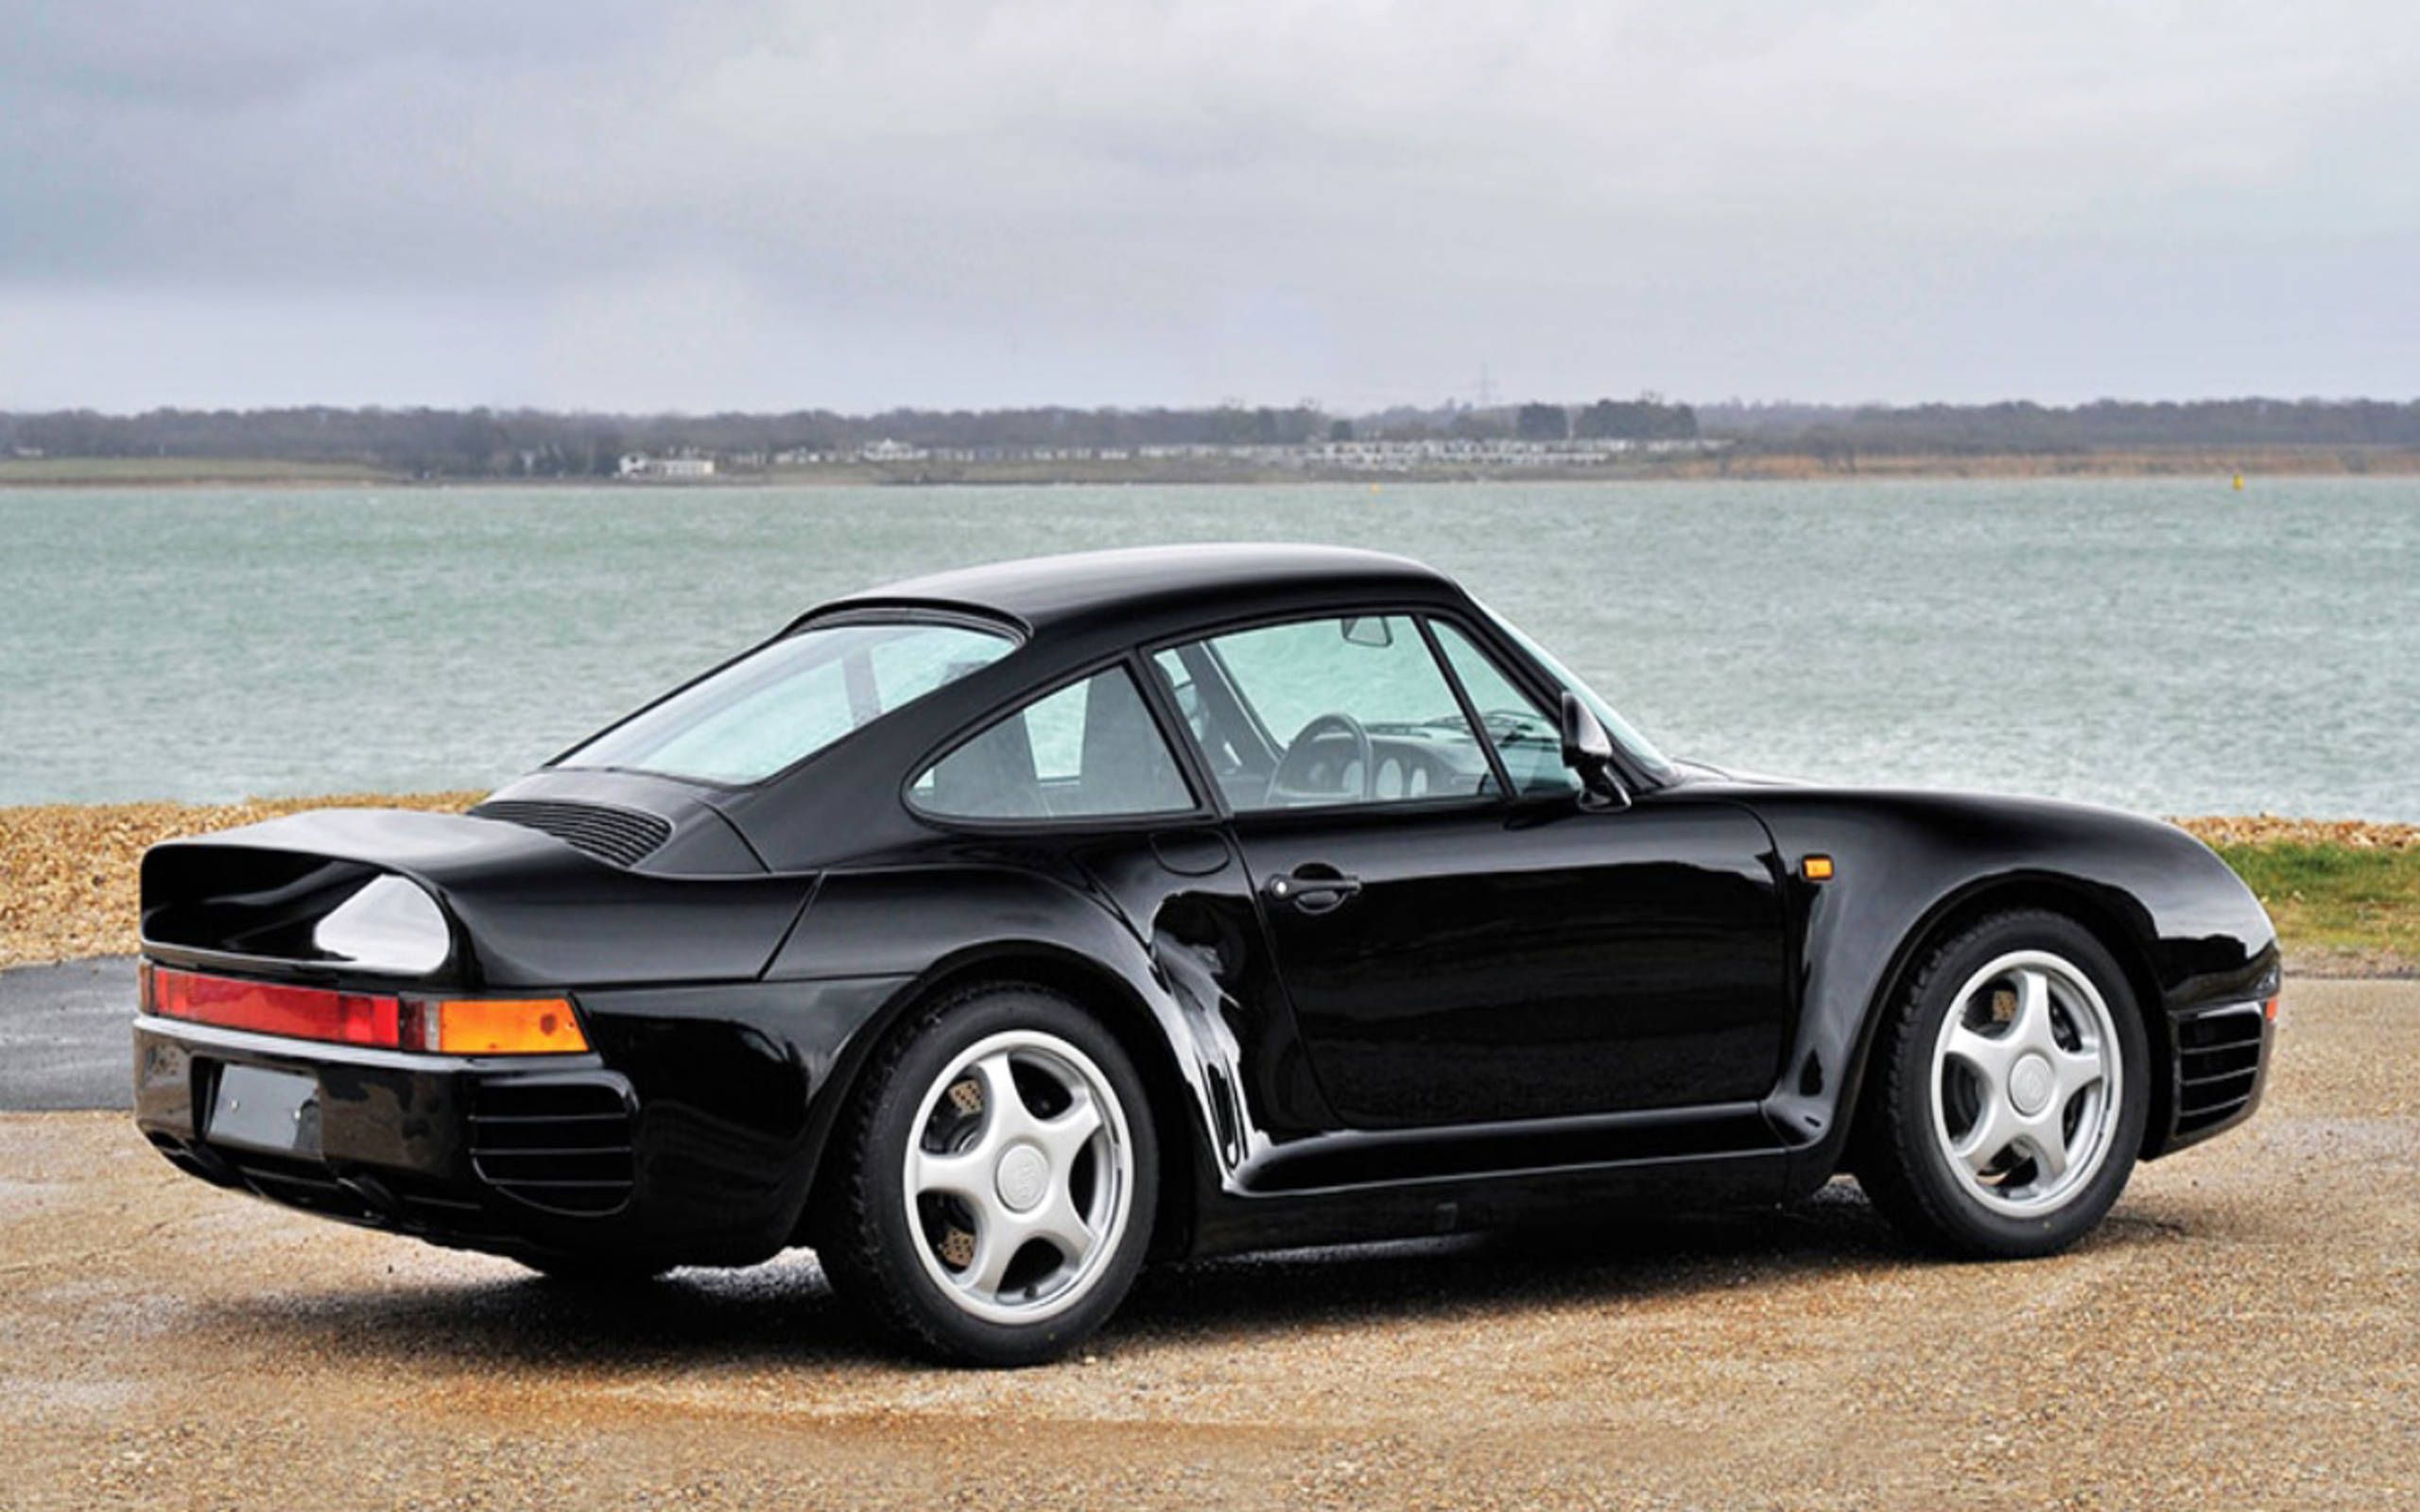 Is This Low Mile Porsche 959 About To Set A Record Price At Auction?